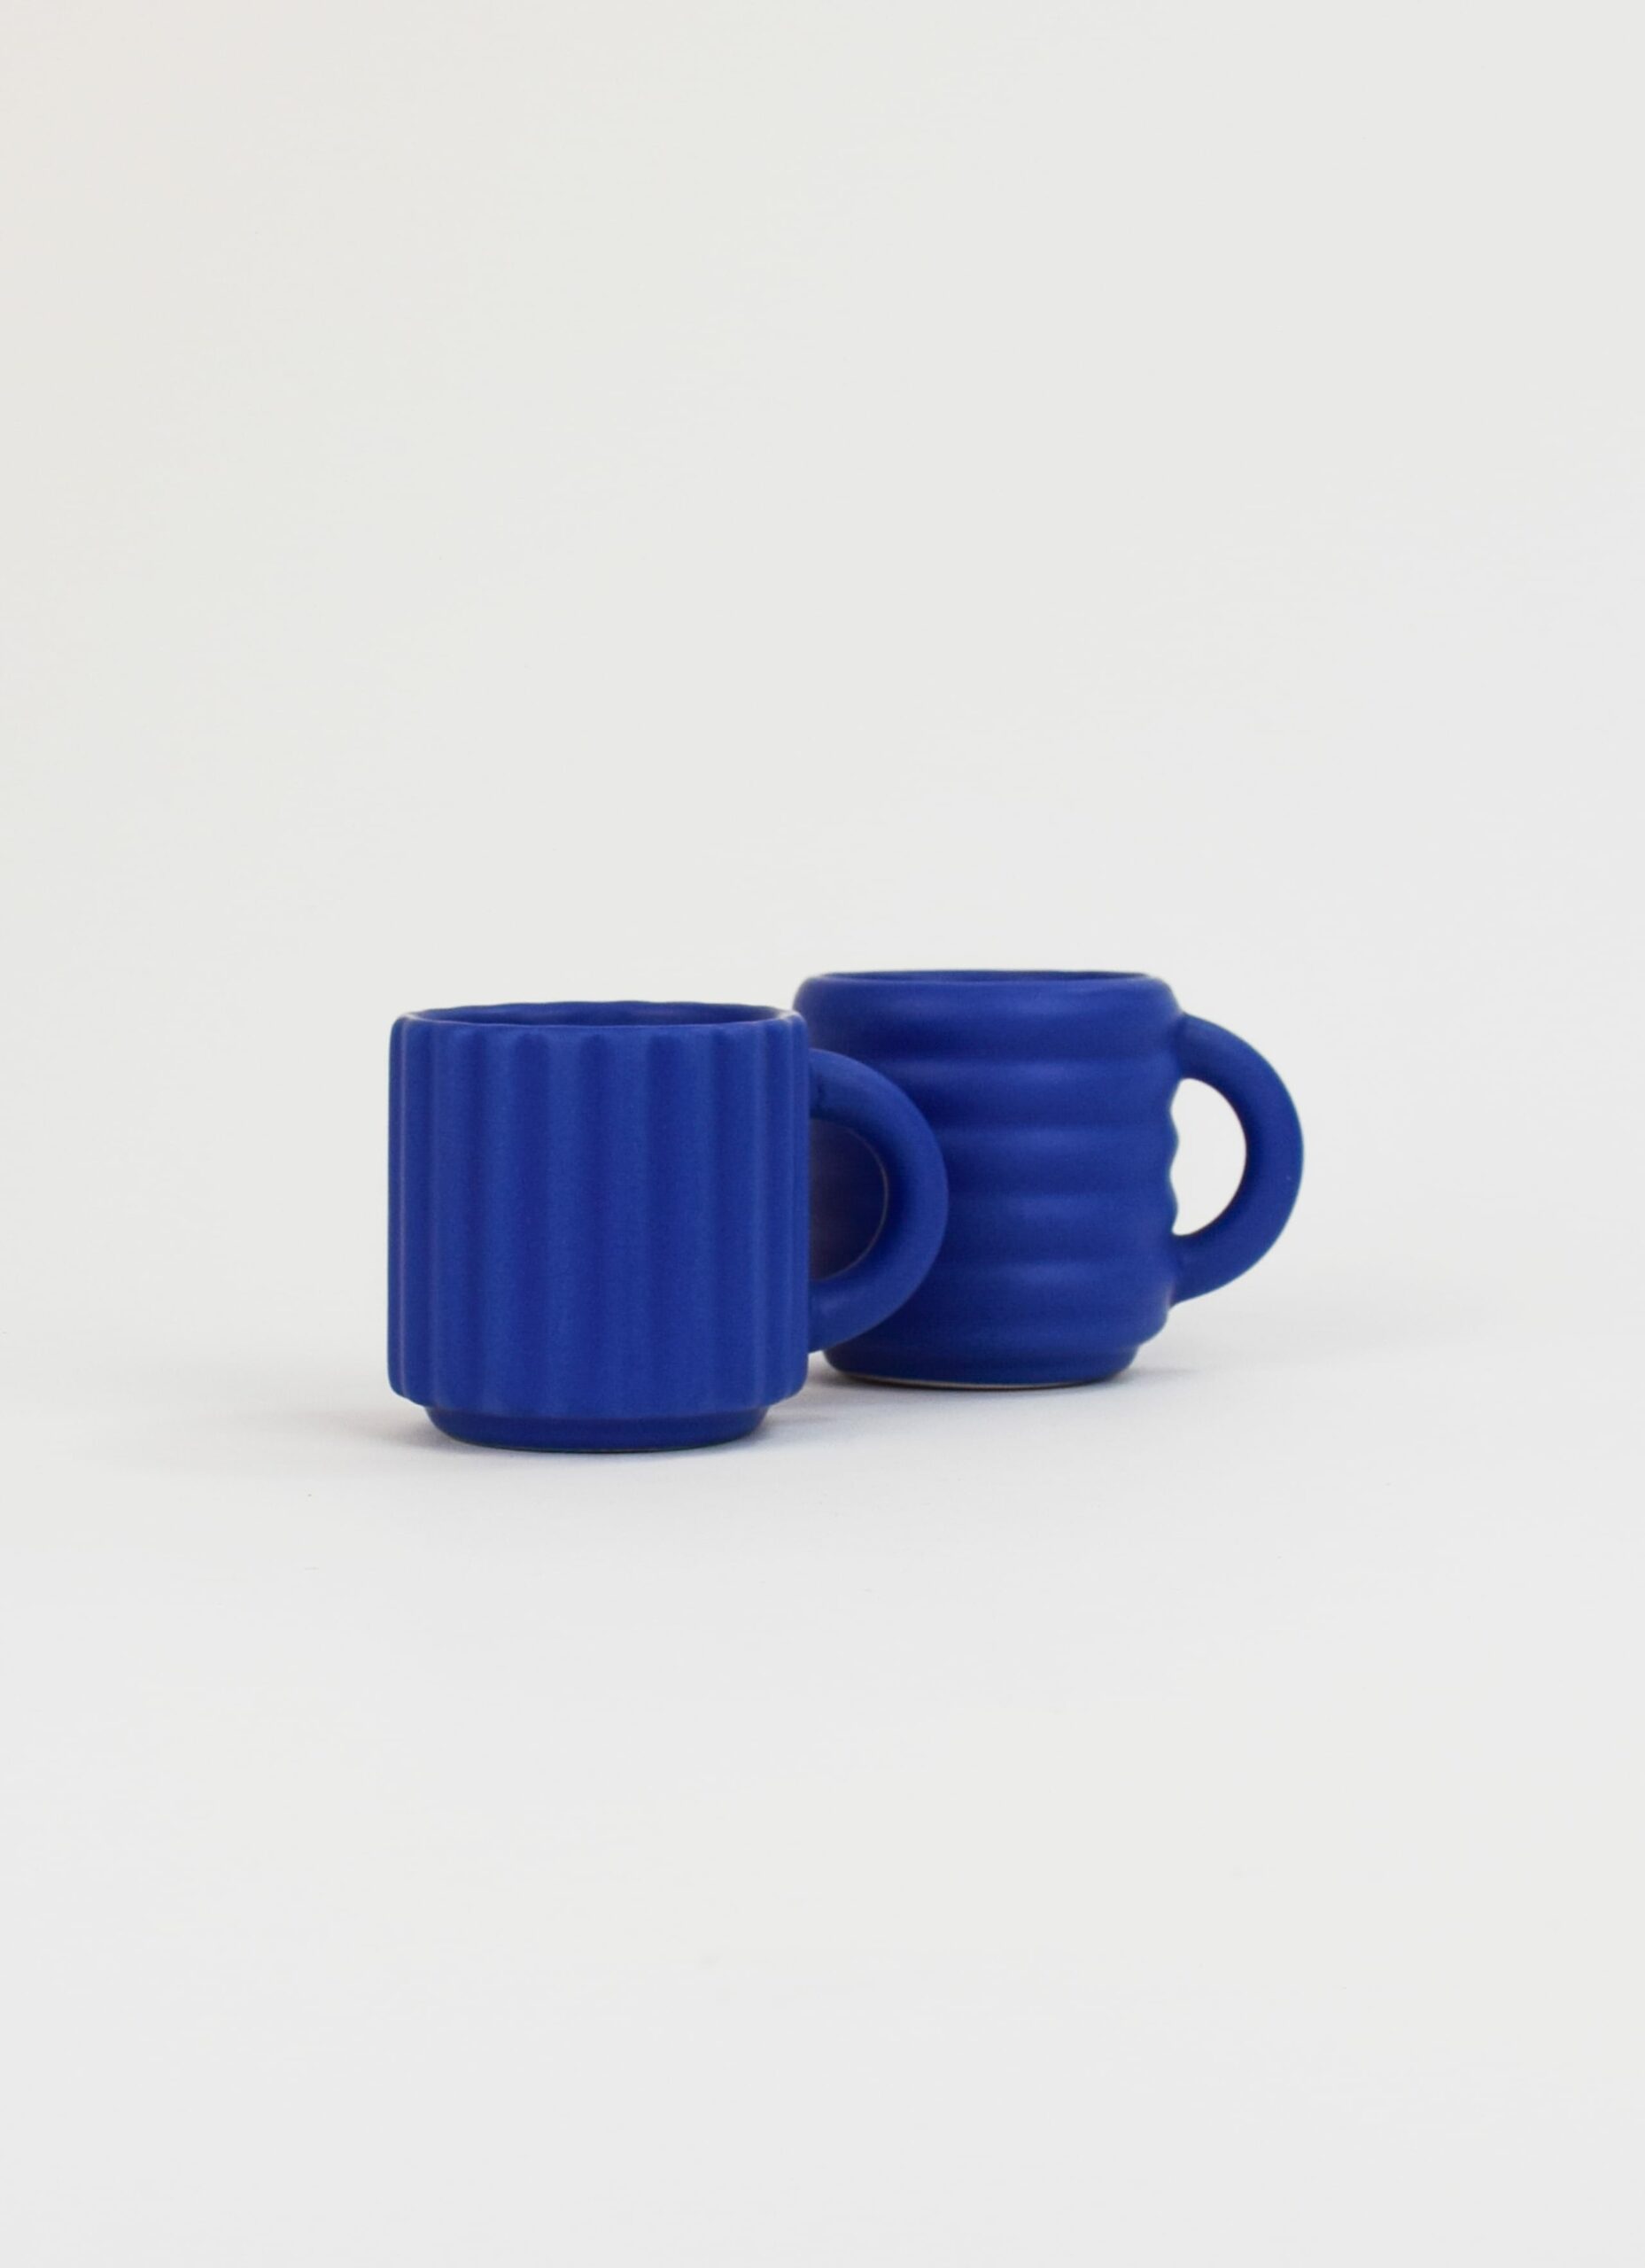 Form and Seek - Ripple Espresso Cups - Set of Two - Cobalt